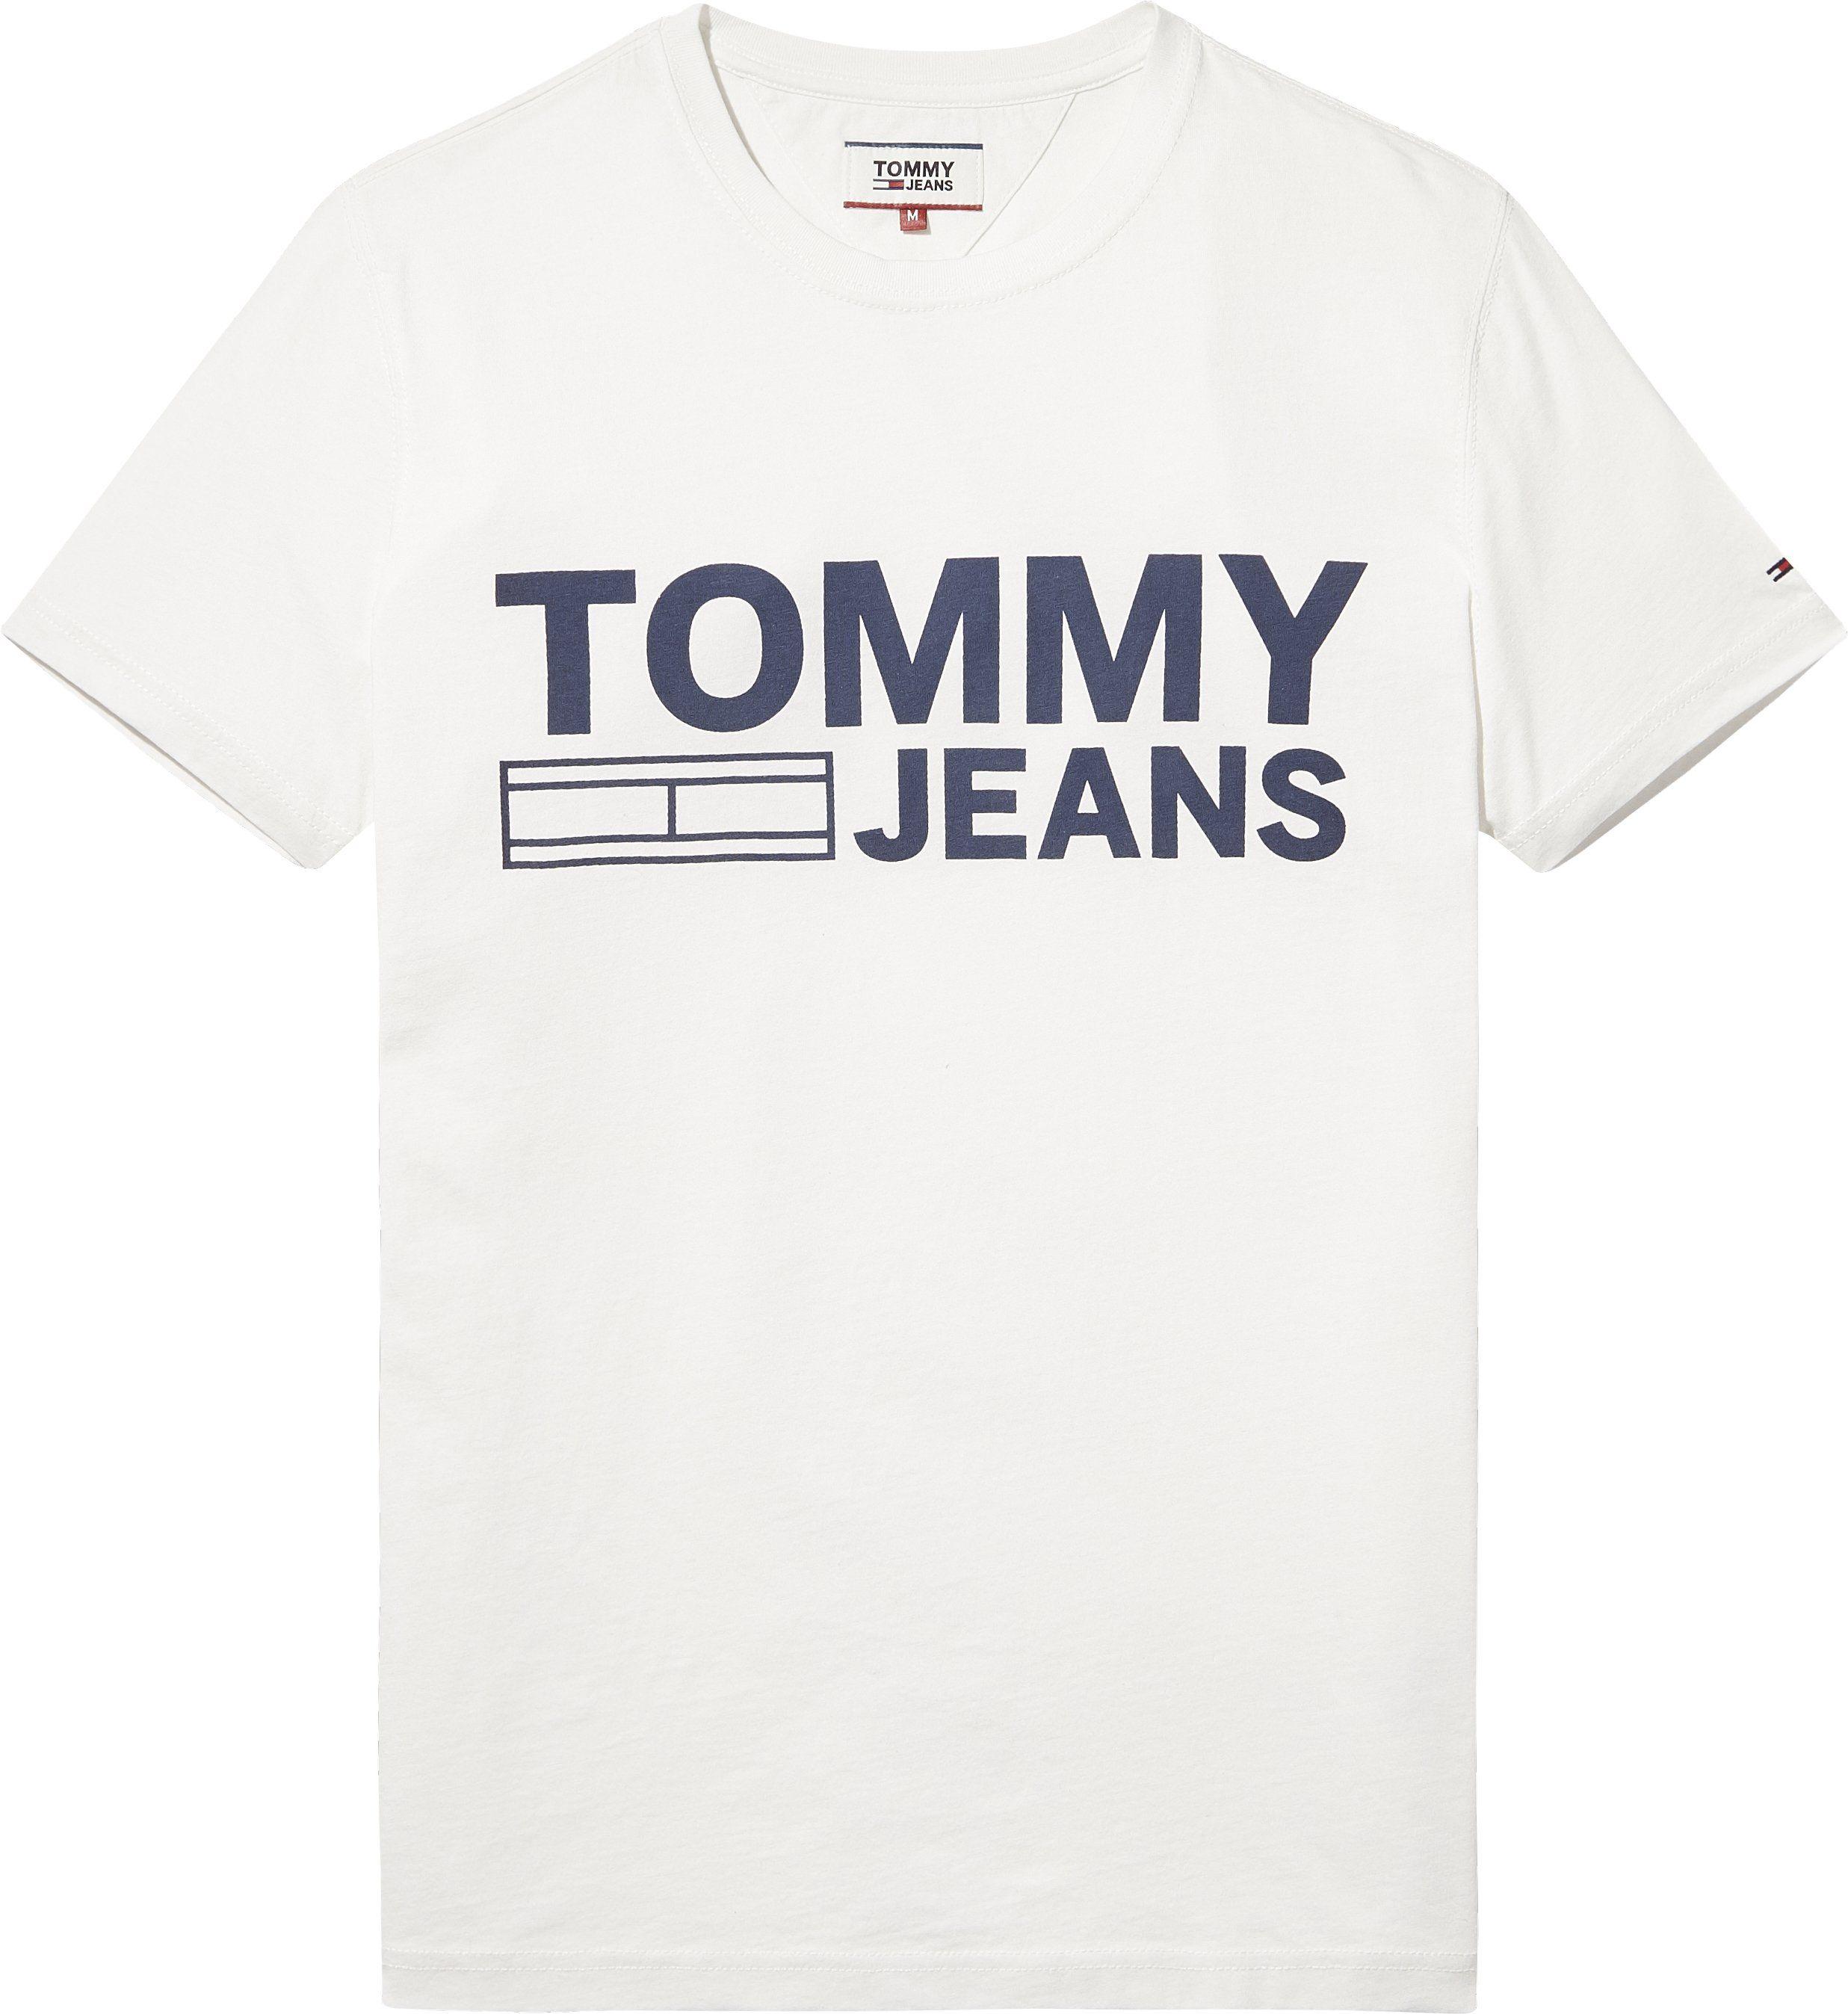 Tommy Jeans Logo - TOMMY JEANS ORGANIC COTTON LOGO T-SHIRT – 7clothing